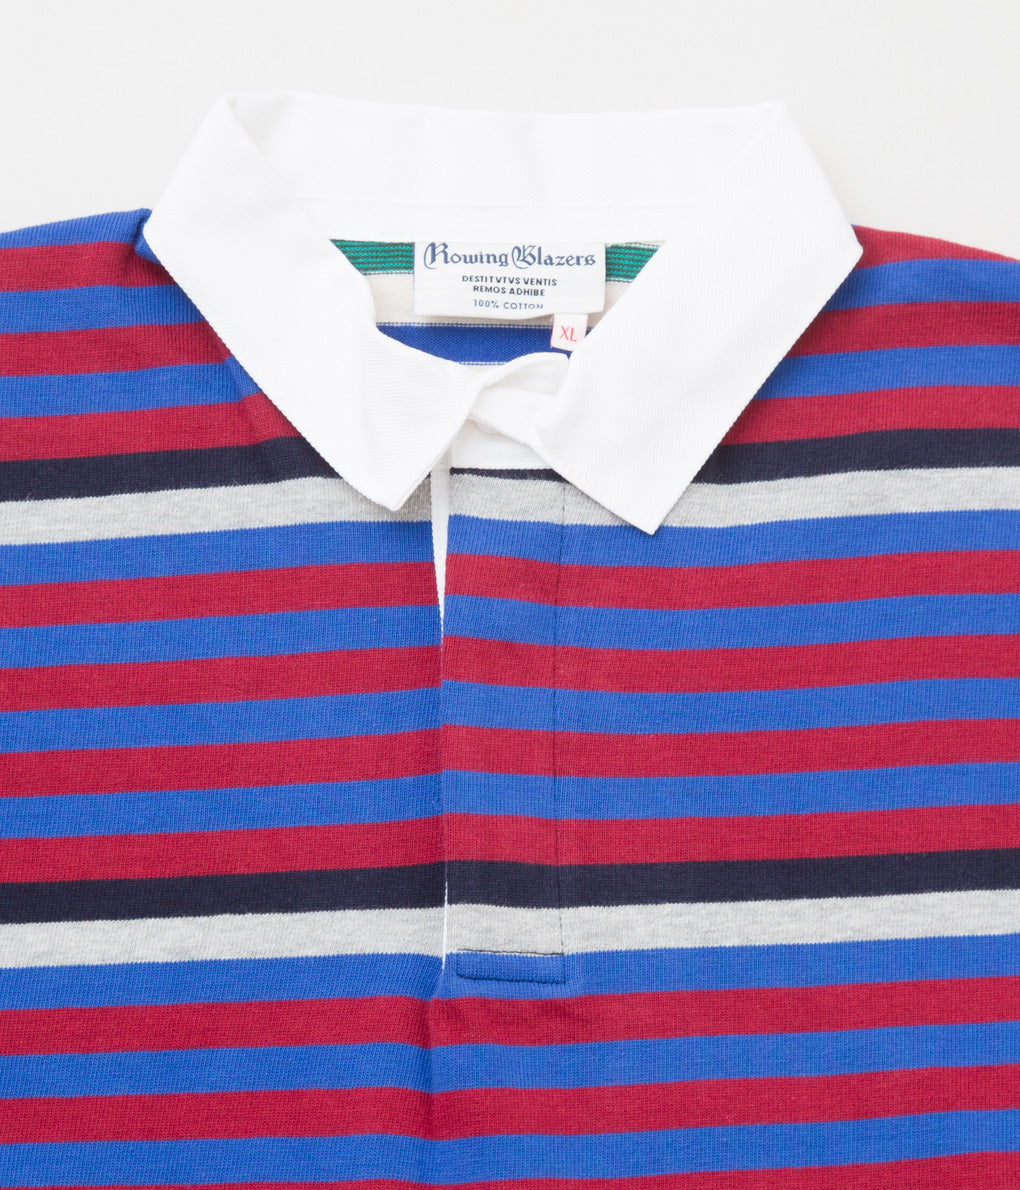 ROWING BLAZERS "END-OF-THE-DAY RUGBY" (RED/BLUE MULTI)